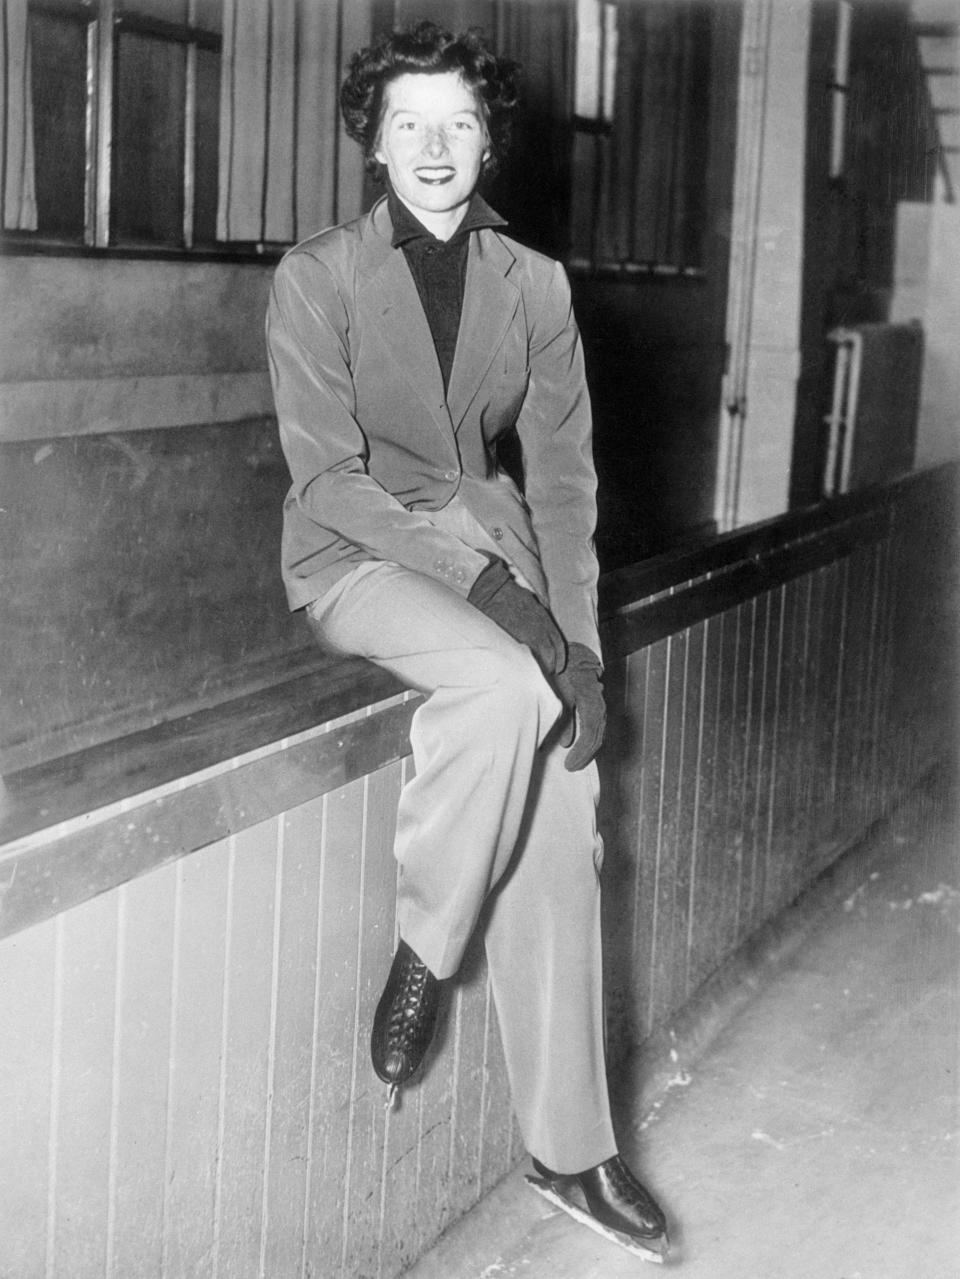 Hepburn wears a suit on the ice rink at Madison Square Garden in this photo from 1936.&nbsp;